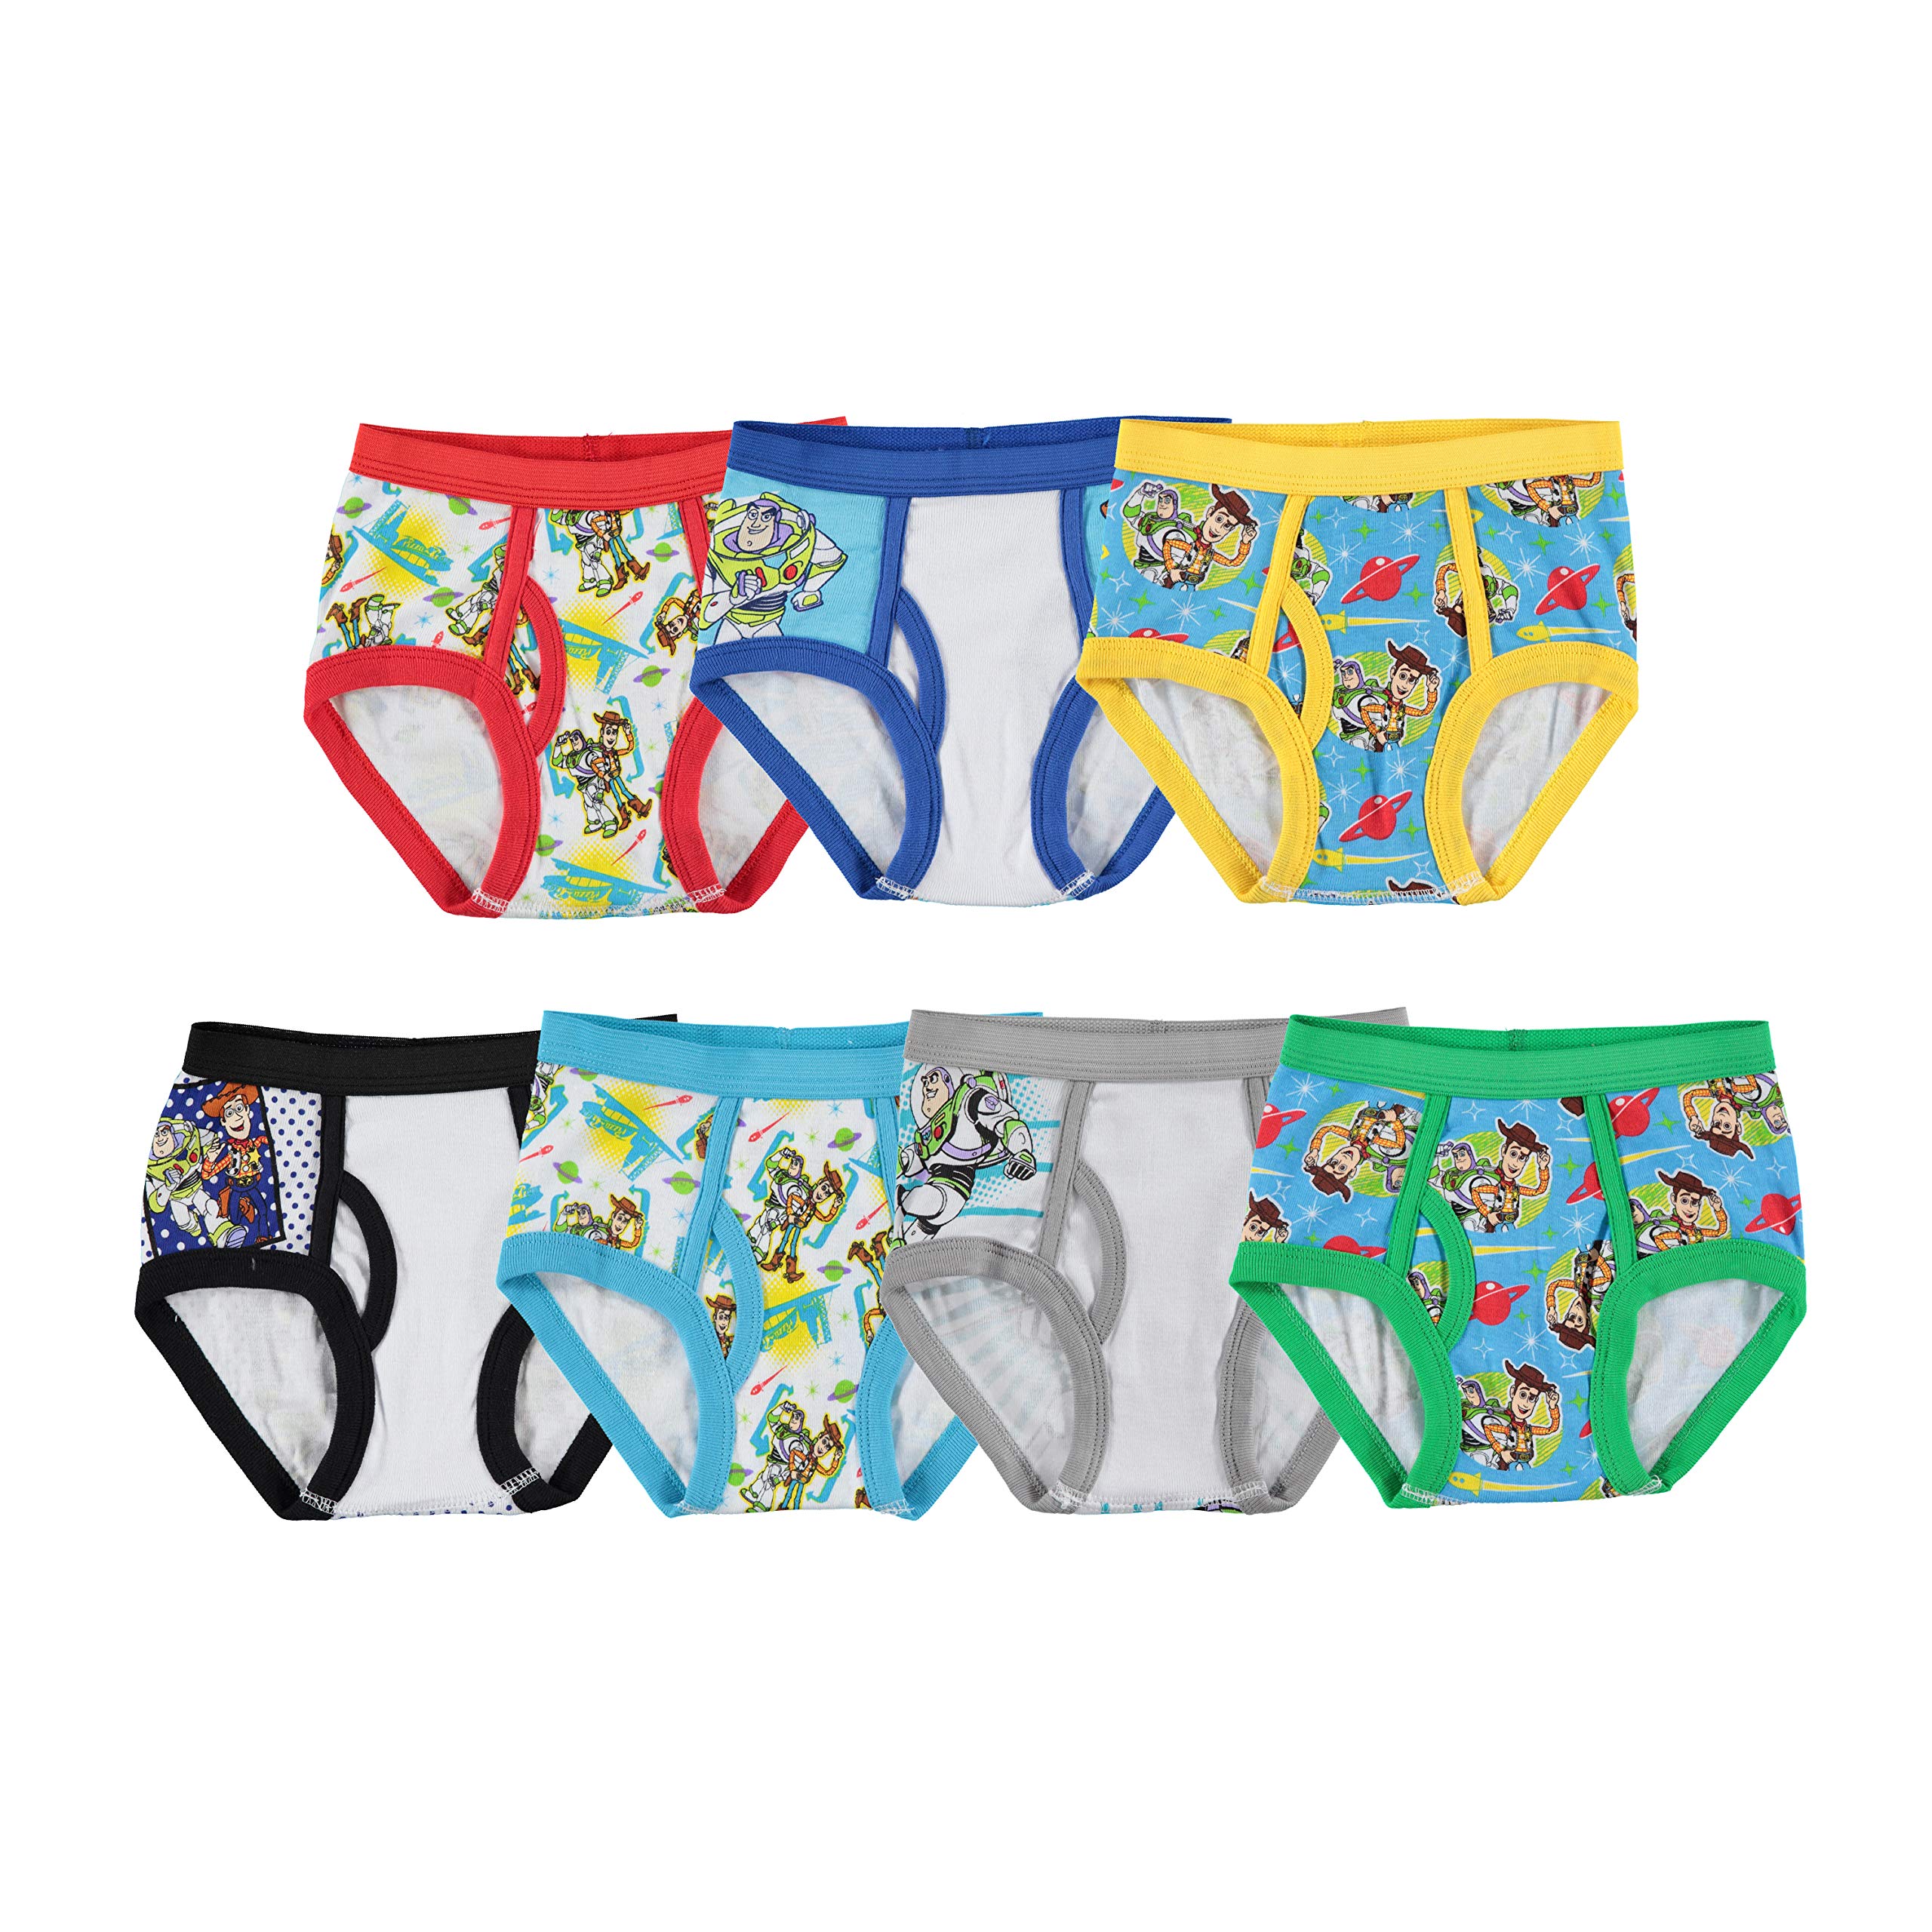 Book Cover Handcraft Little Boys' Toy Story 7 Pack Brief, Multi, 2T/3T